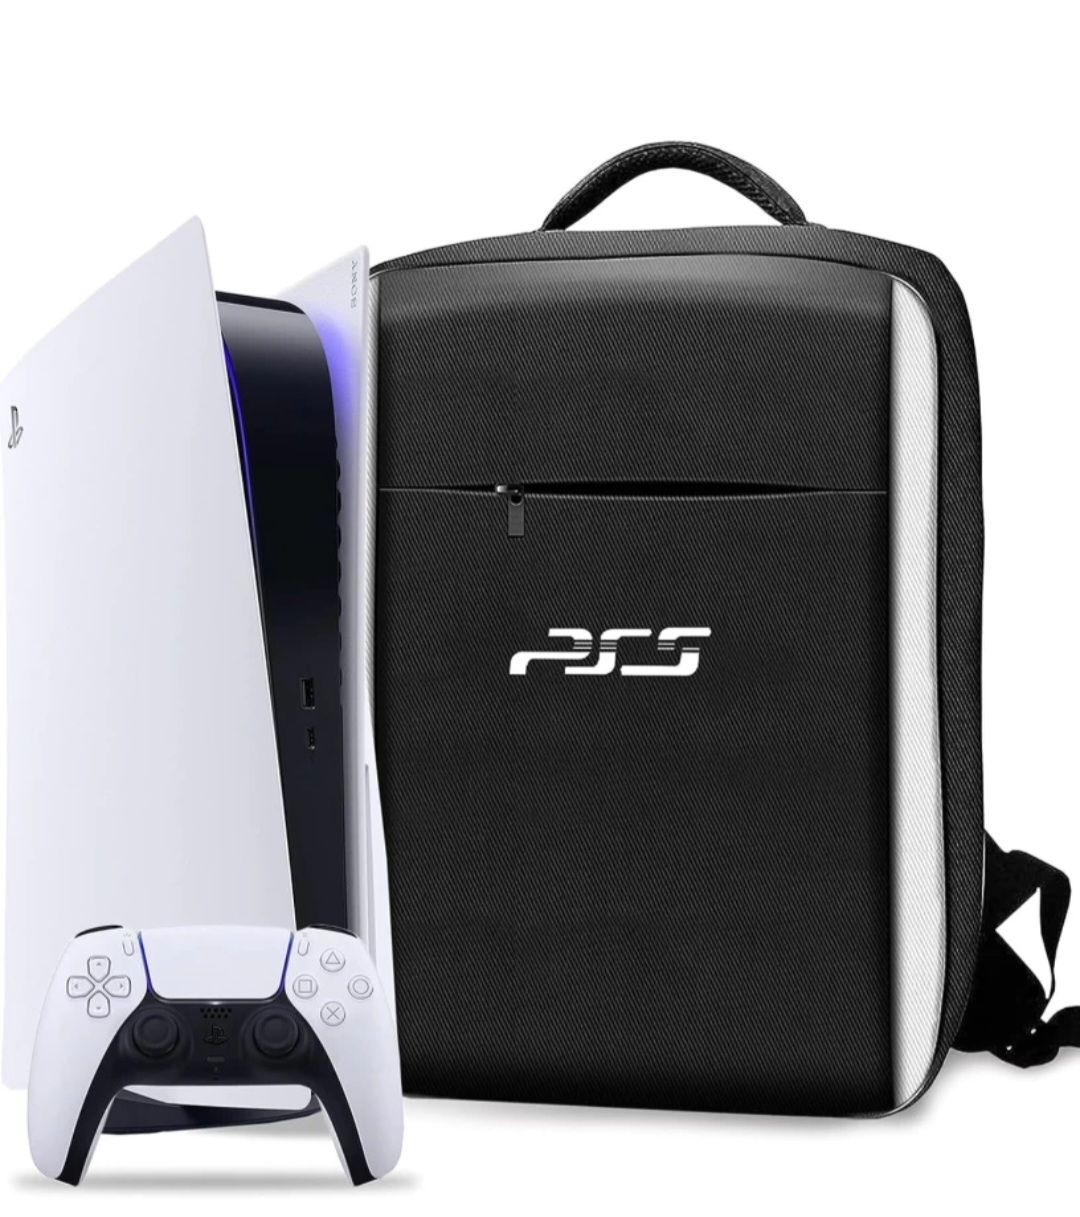 Sony Ps5 Console India bag and controller with console set